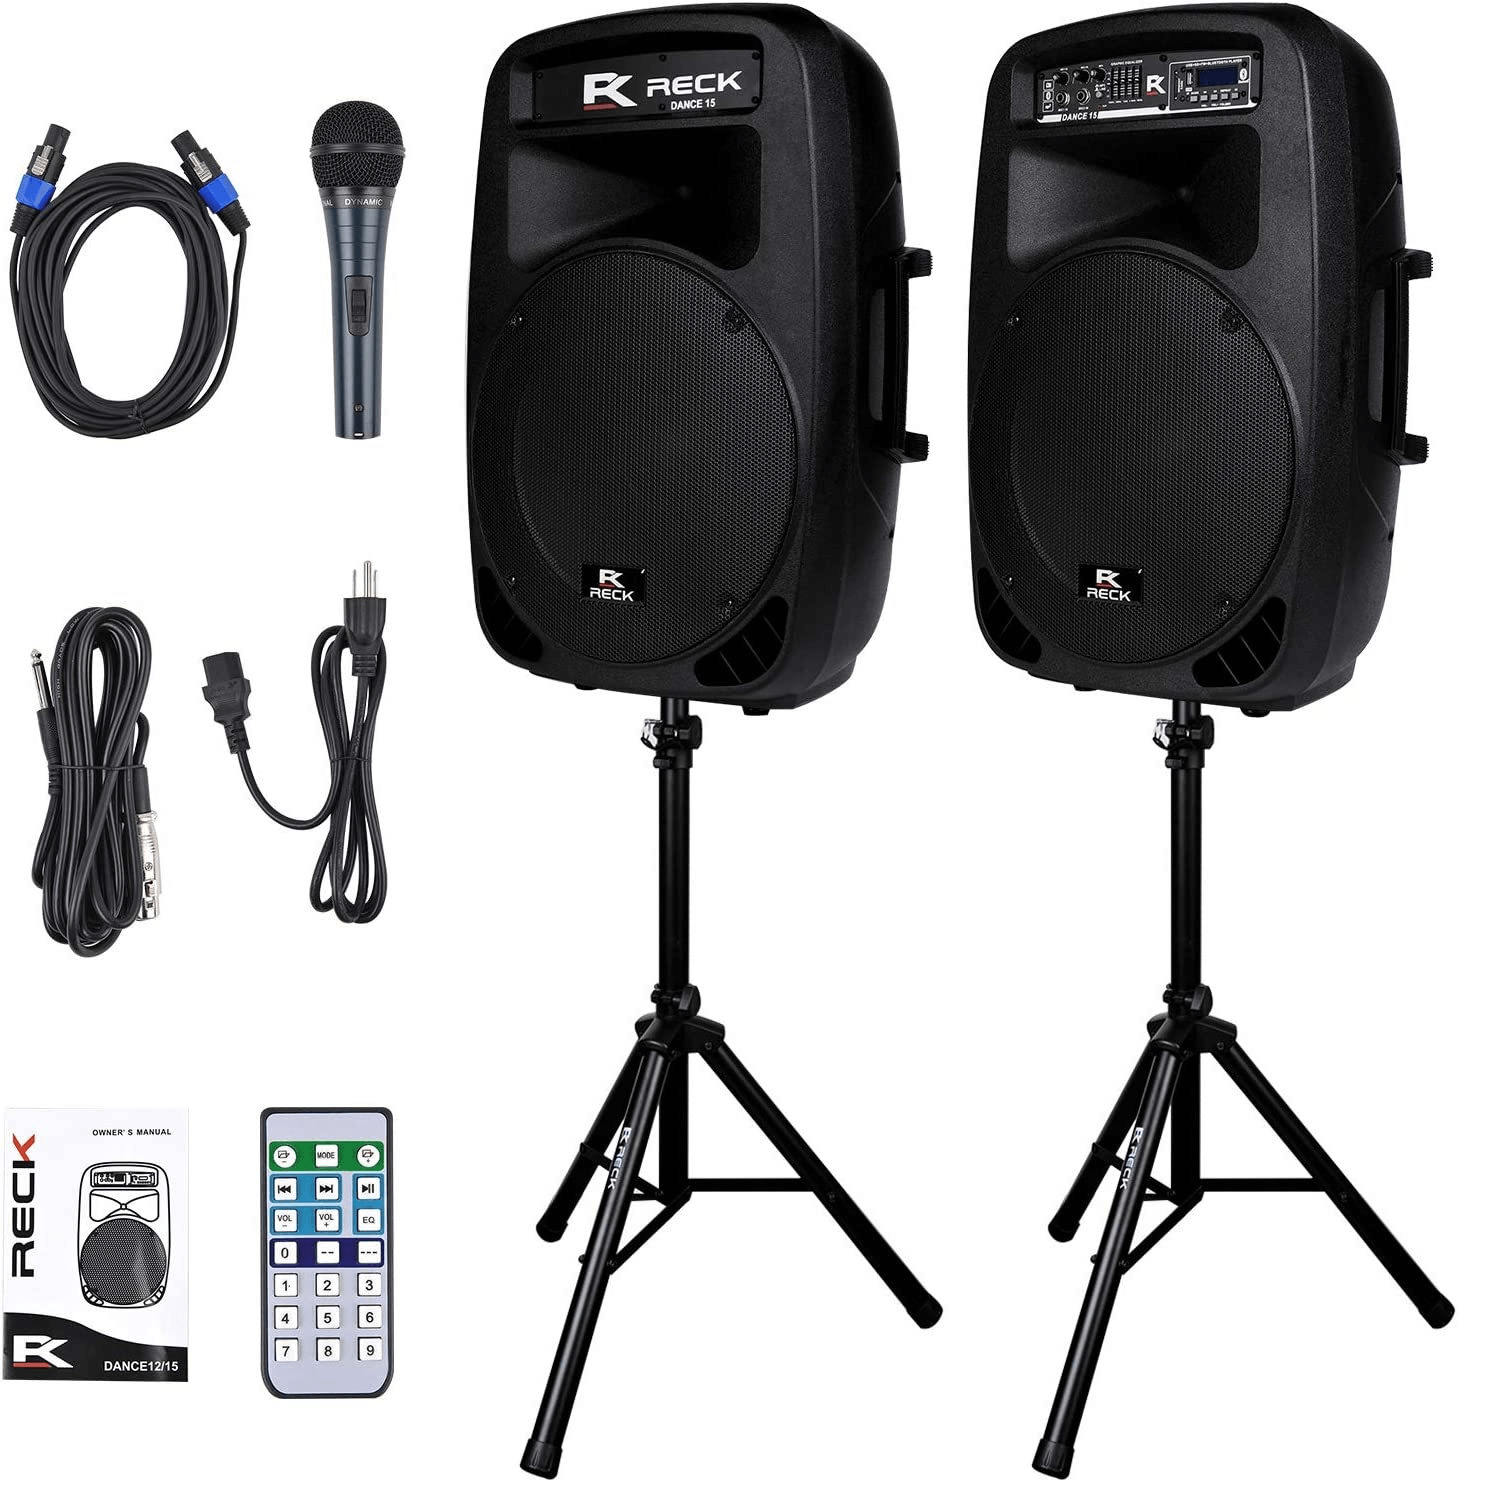 Proreck Dance 15|Portable 15-Inch Party Speakers Proreck Speakers